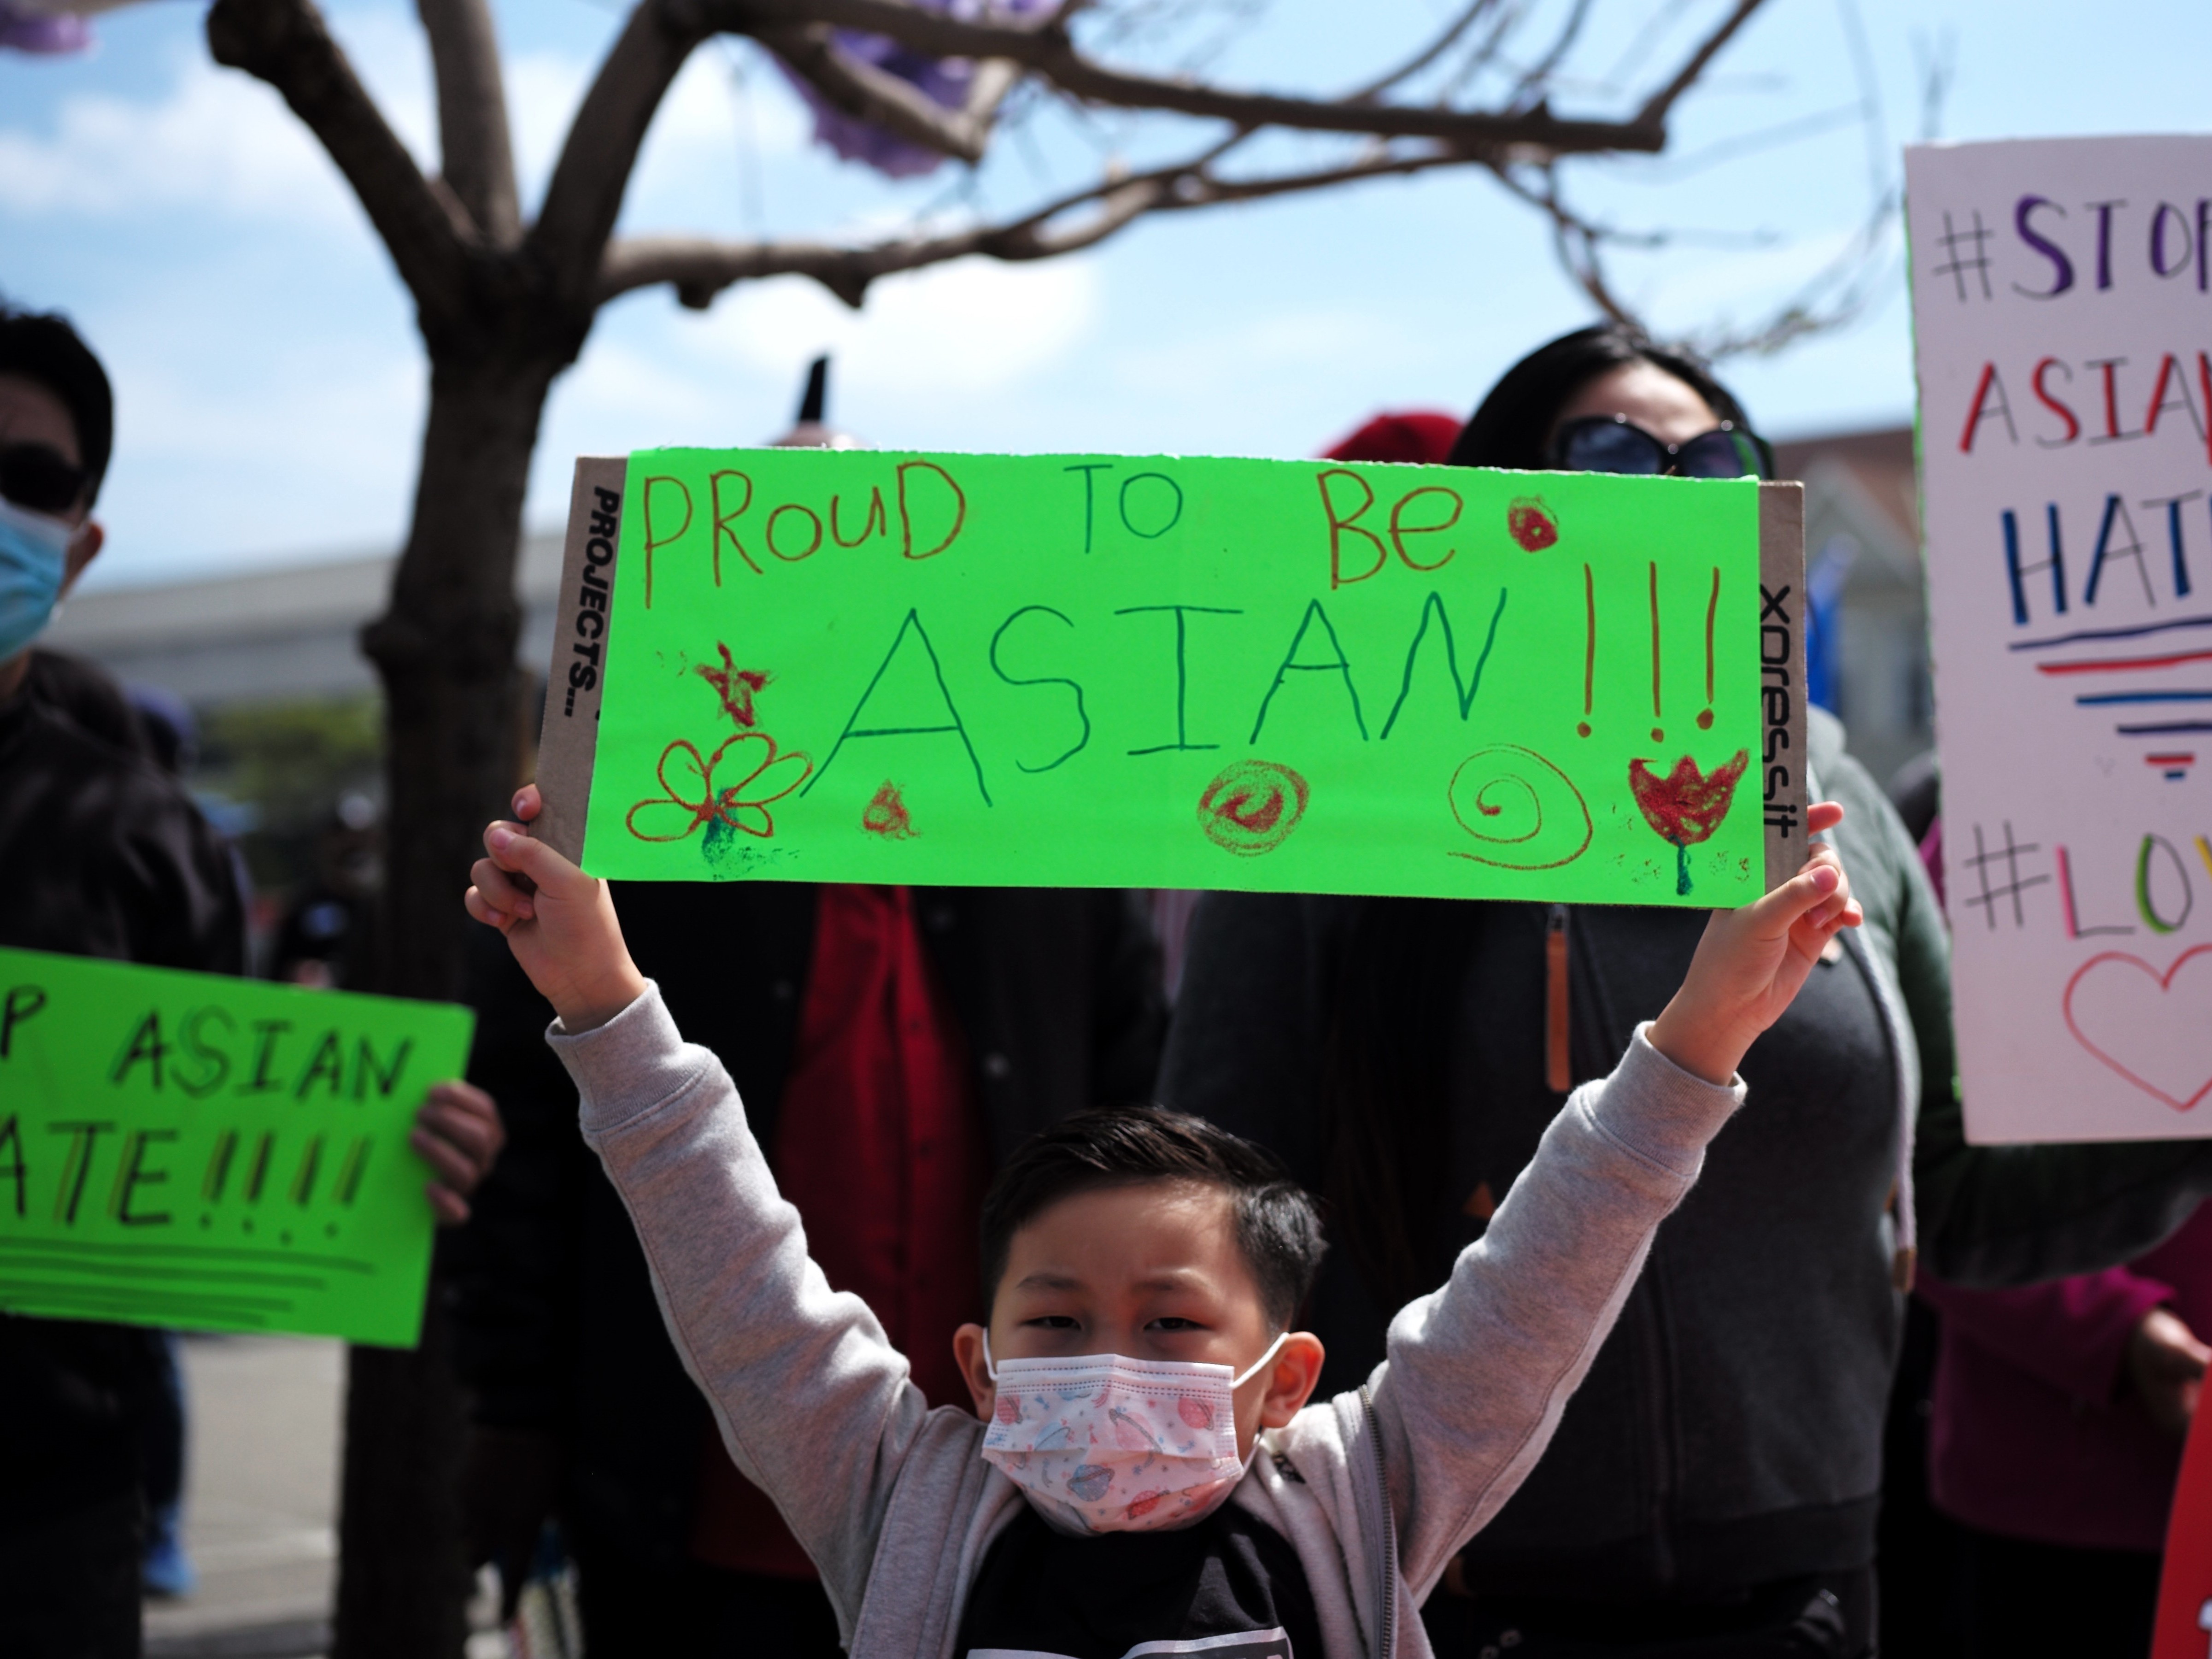 A boy holding a sign takes part in a Stop Asian Hate rally in Oakland, Calif.